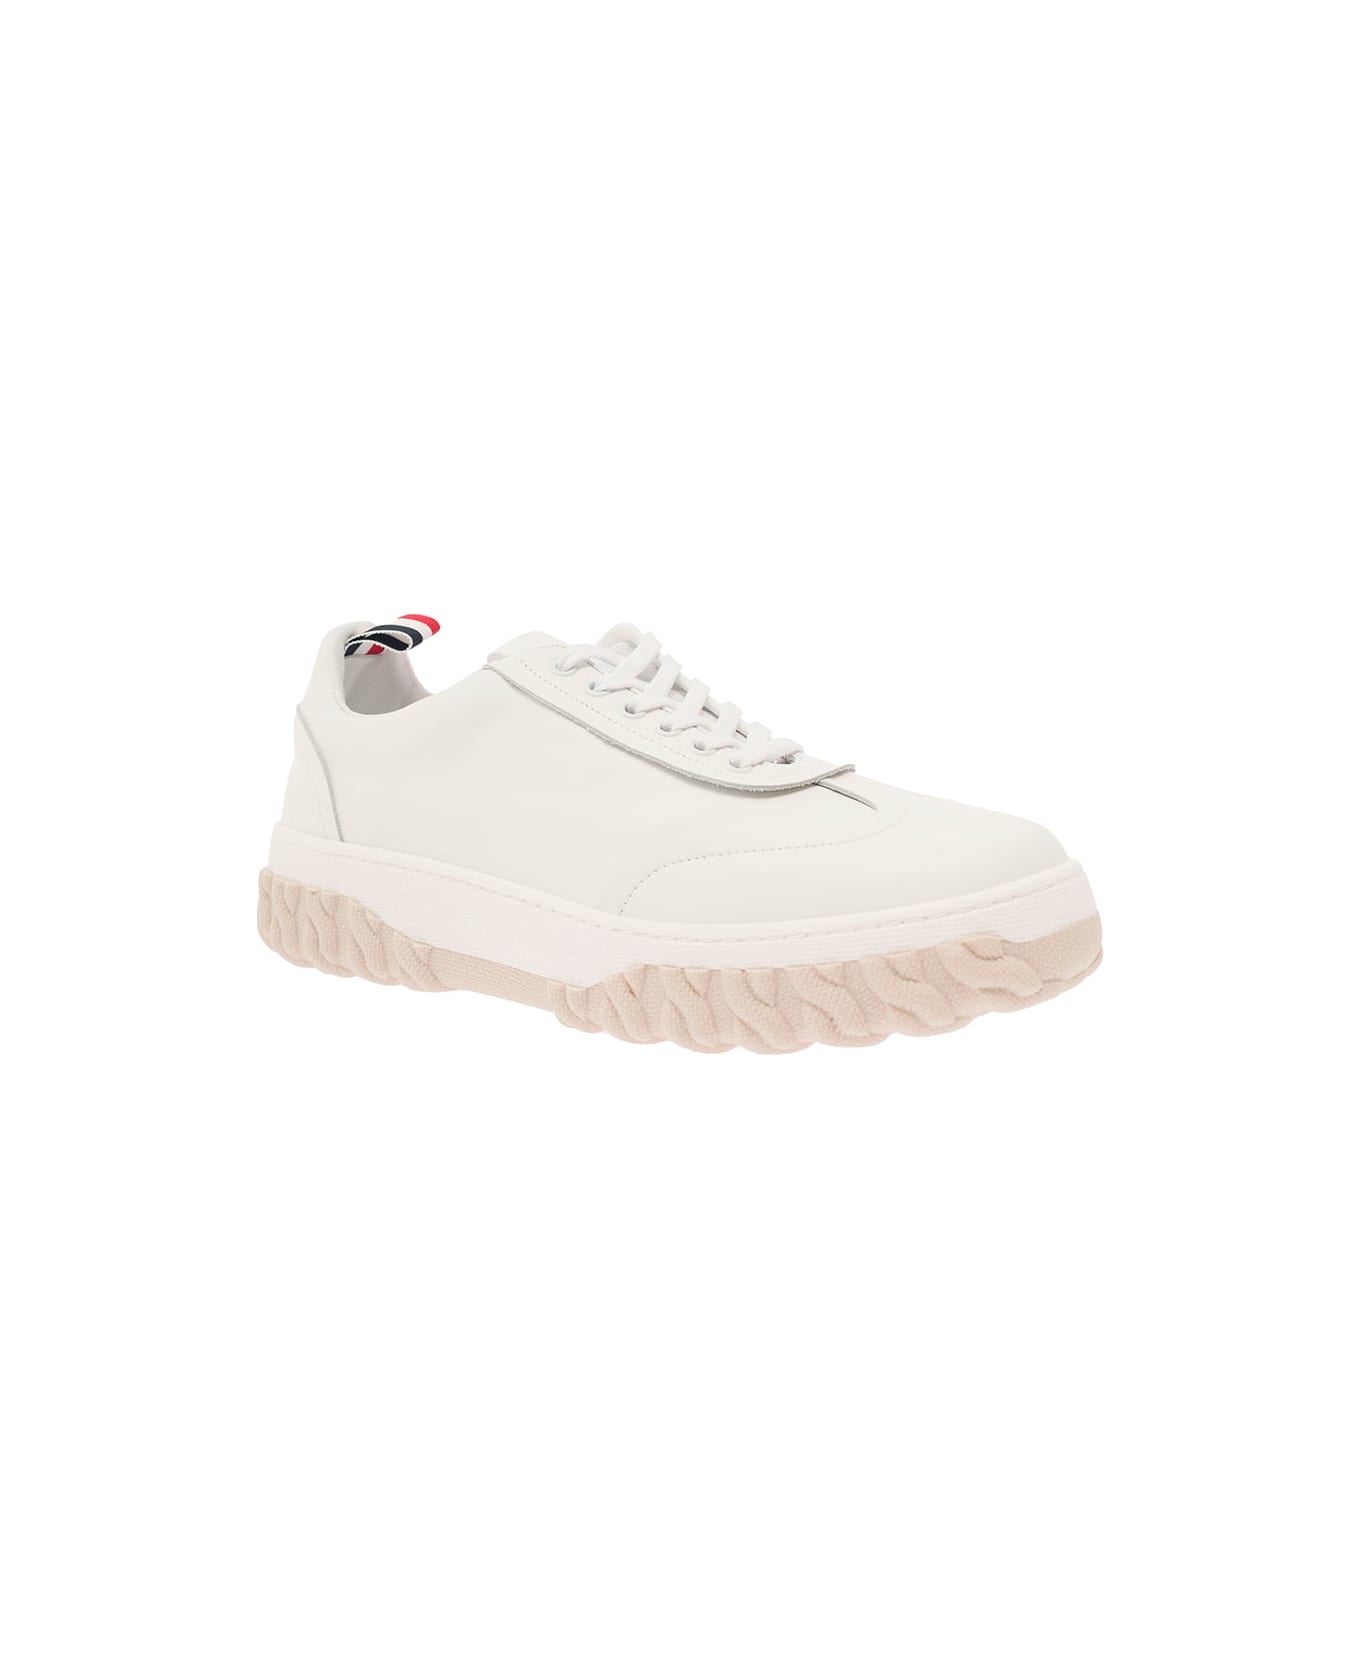 Thom Browne Field Shoe W/ Raw Edge On Cable Knit Sole In Vitello Calf Leather - WHITE スニーカー